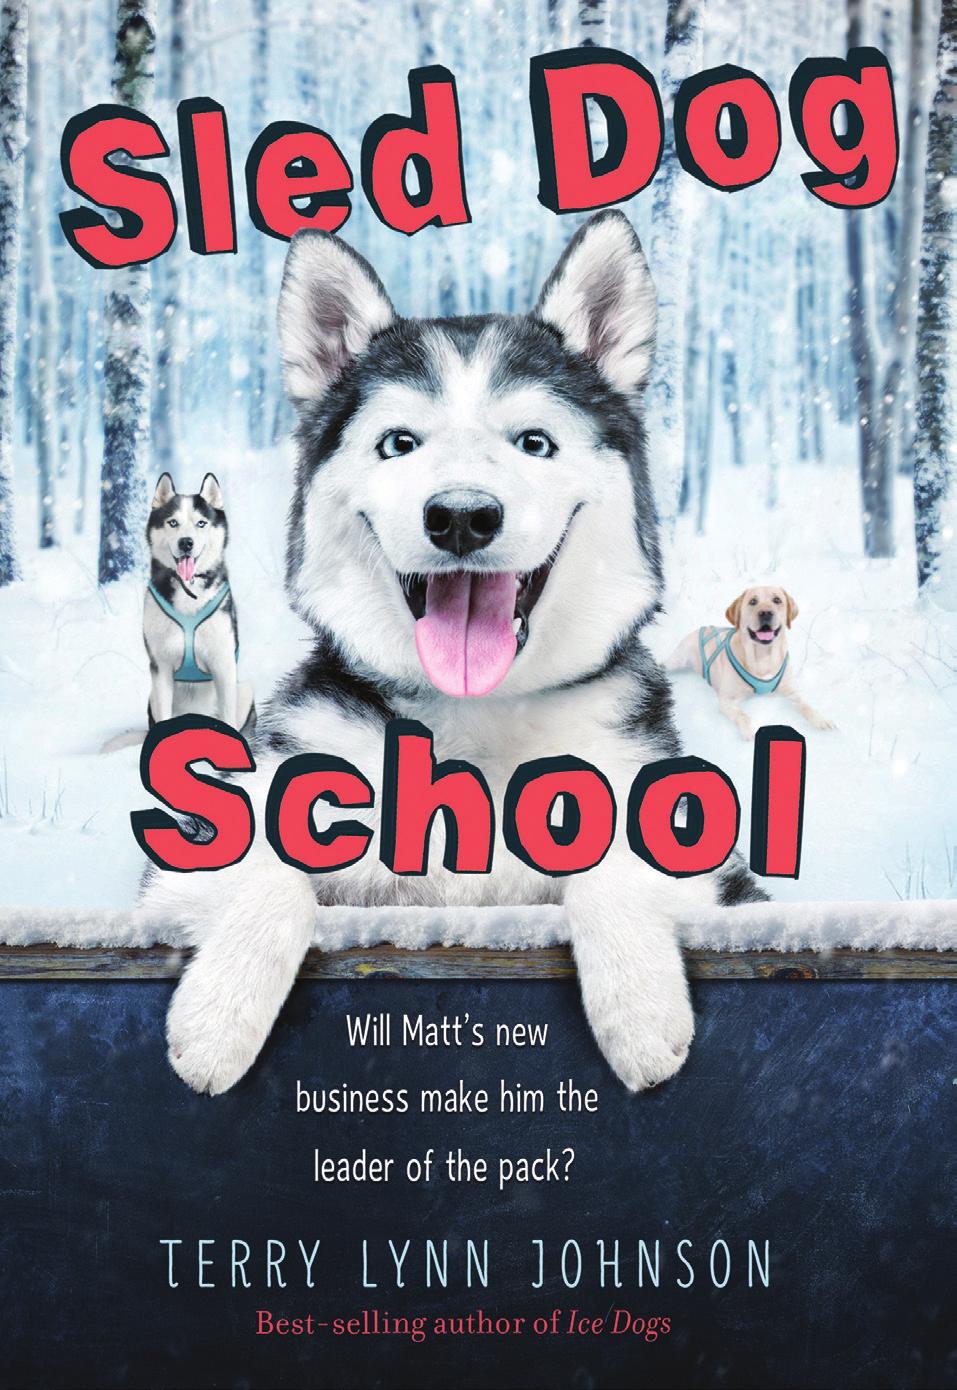 He has to ace this assignment to save his failing math grade. But what is he even good at? The only thing he truly loves doing is running his team of dogs.